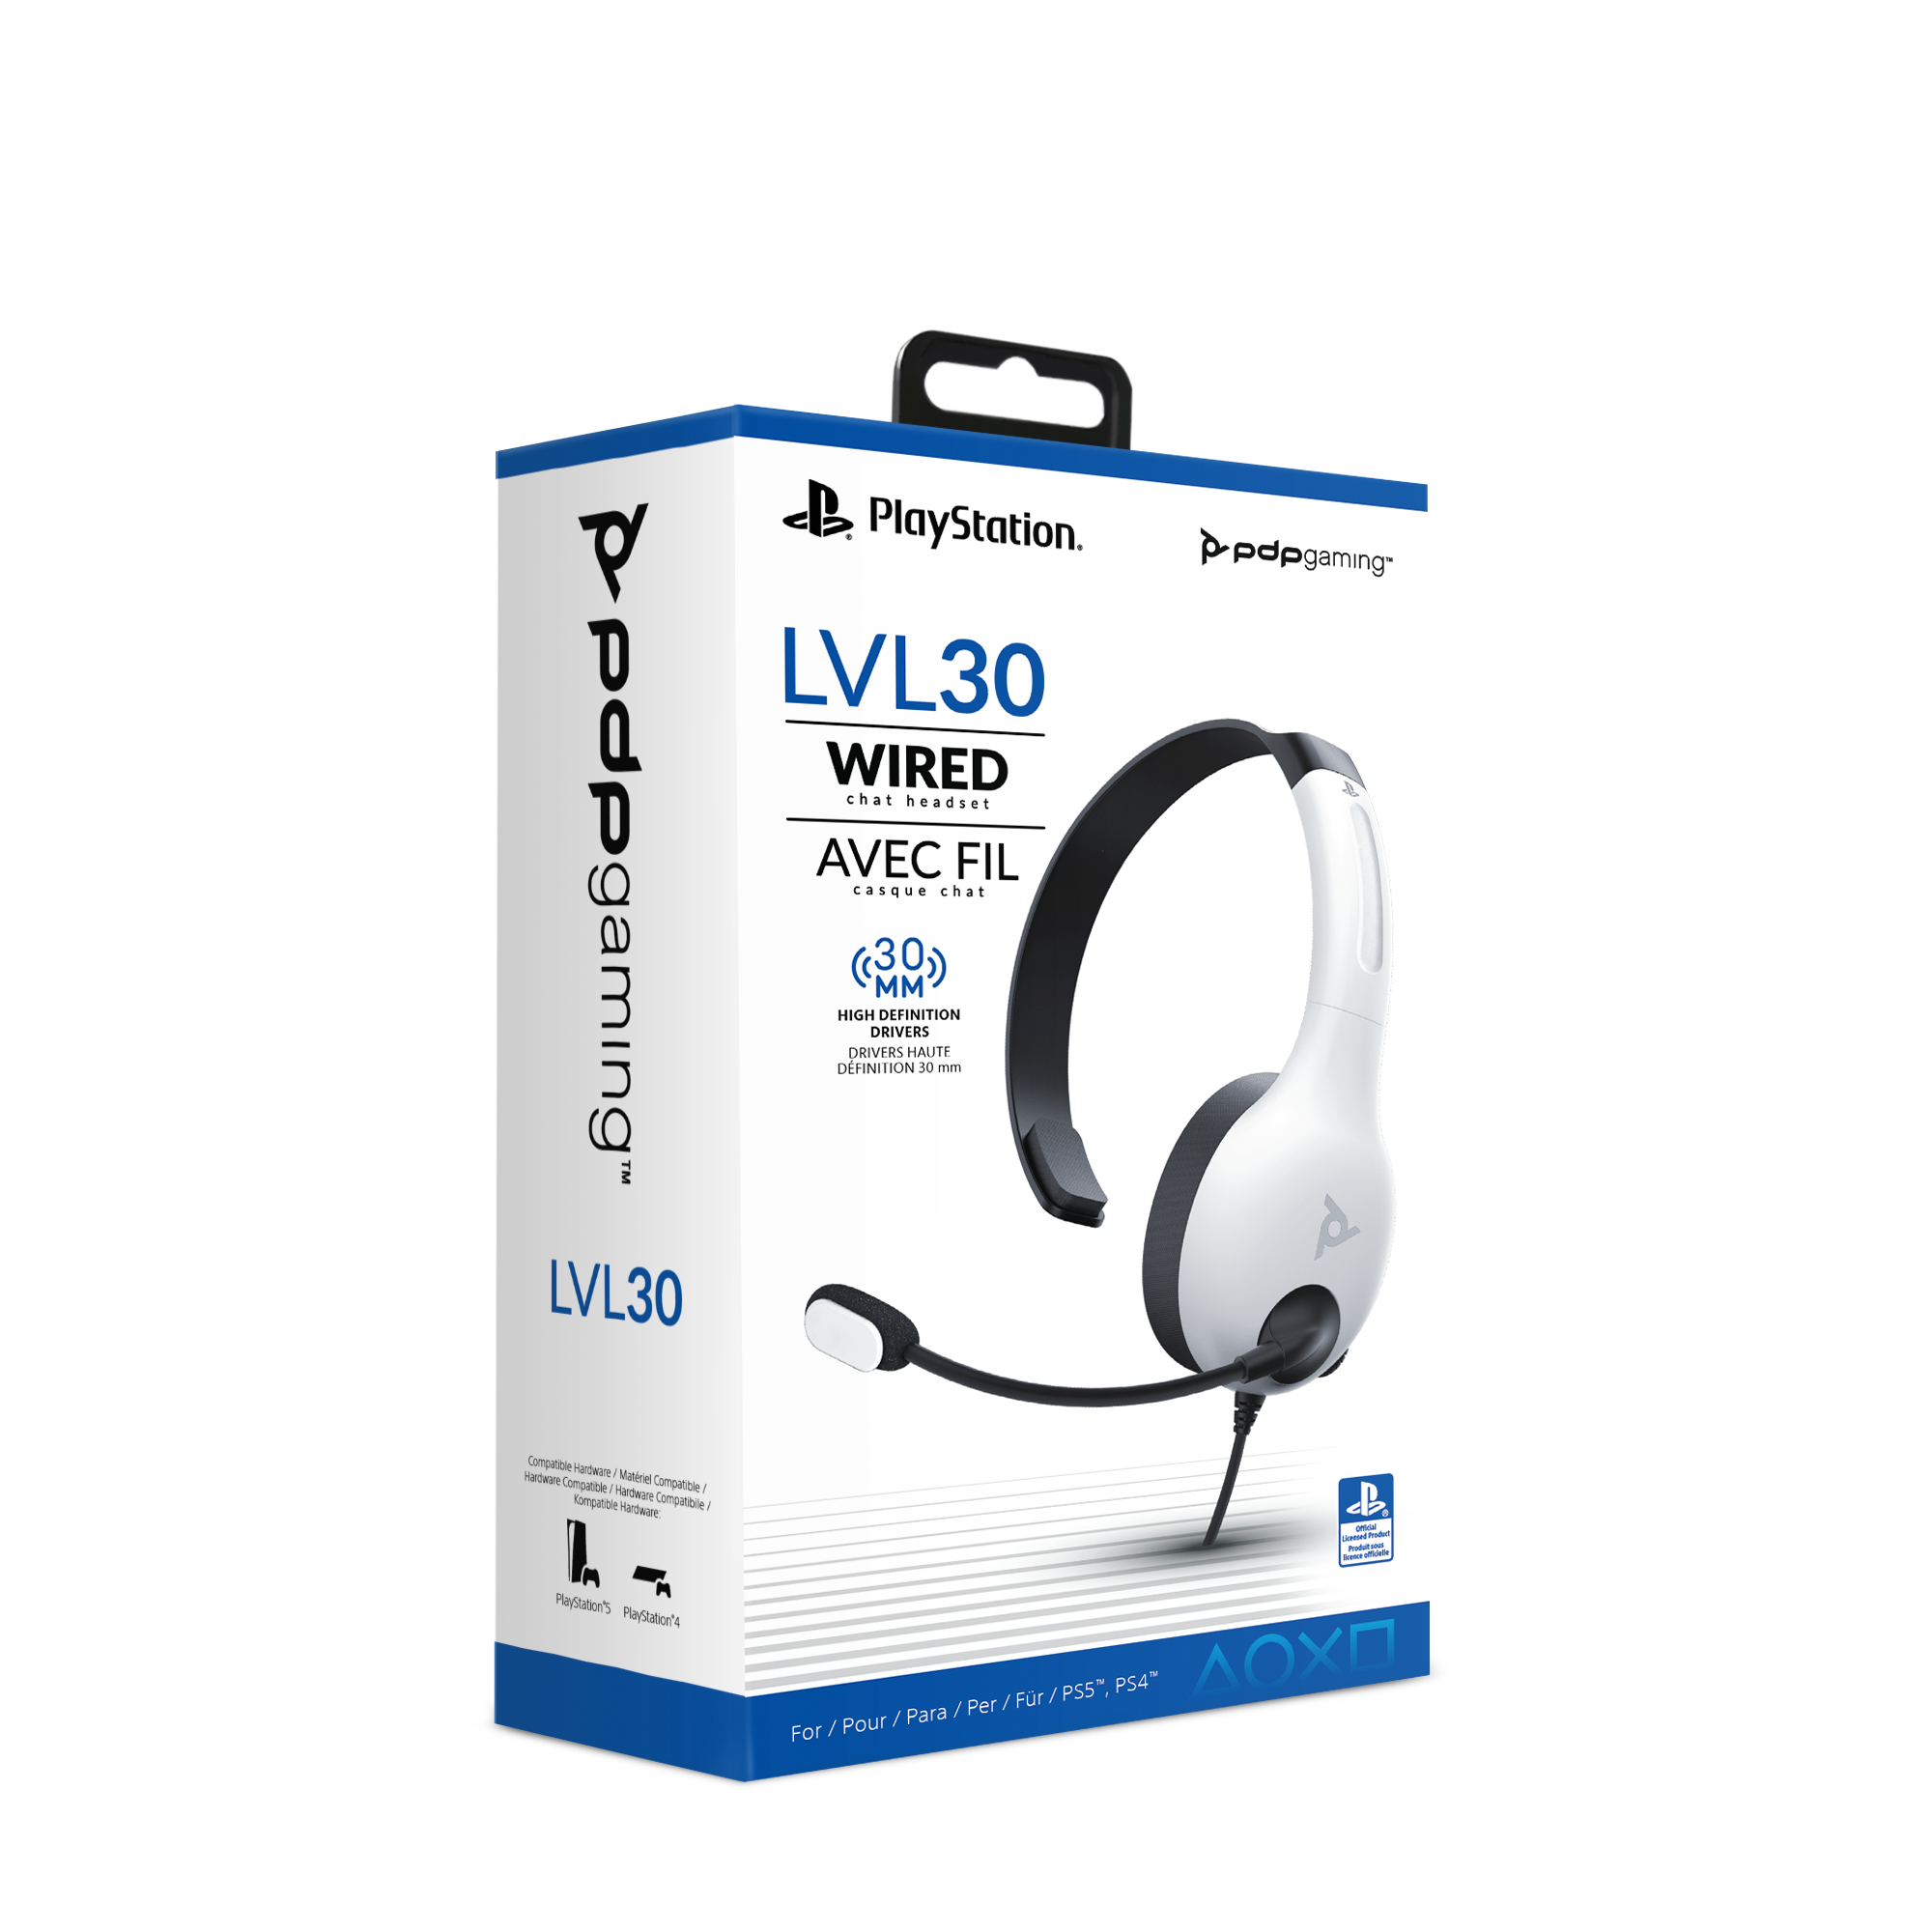 PDP Gaming LVL30 Wired Chat Headset With Noise Cancelling Microphone: White - PlayStation 5, PlayStation 4, PC - image 5 of 8